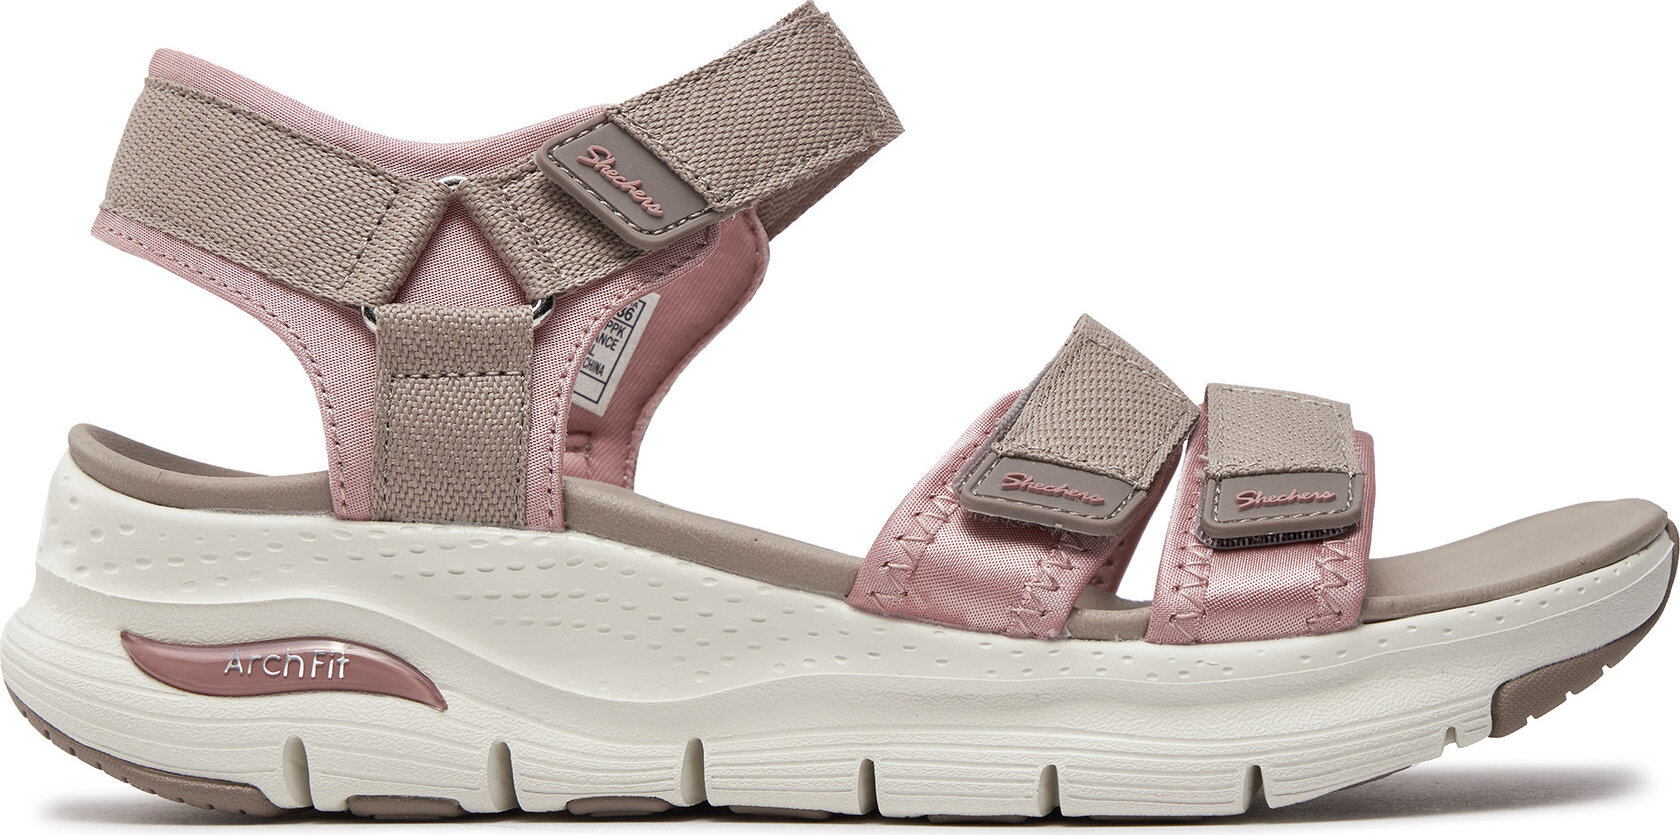 Sandály Skechers Arch Fit-Fresh Bloom 119305/TPPK Taupe